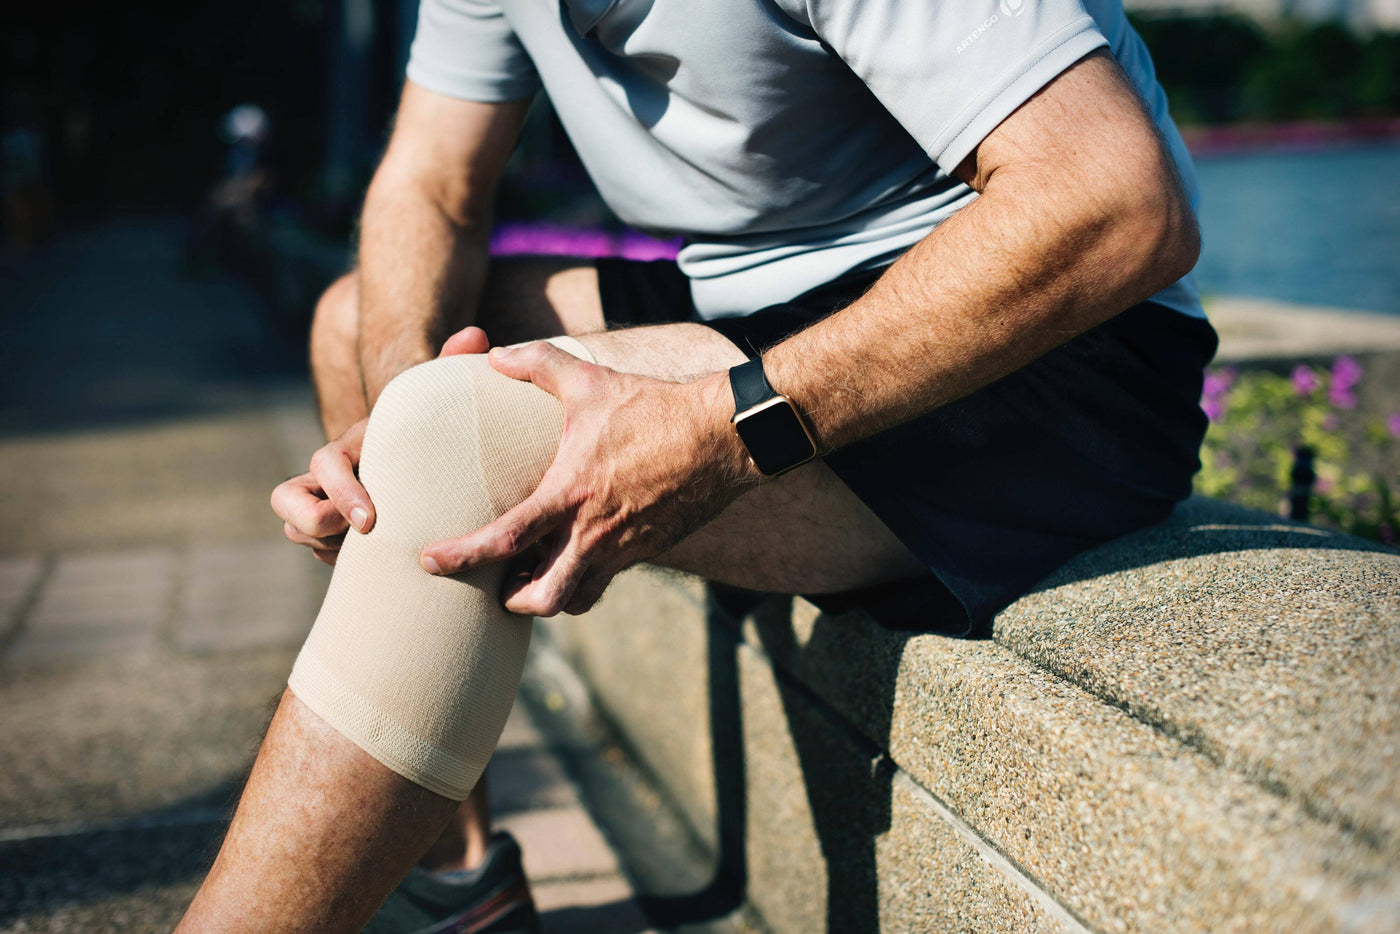 What Are Common Causes of Joint Pain?